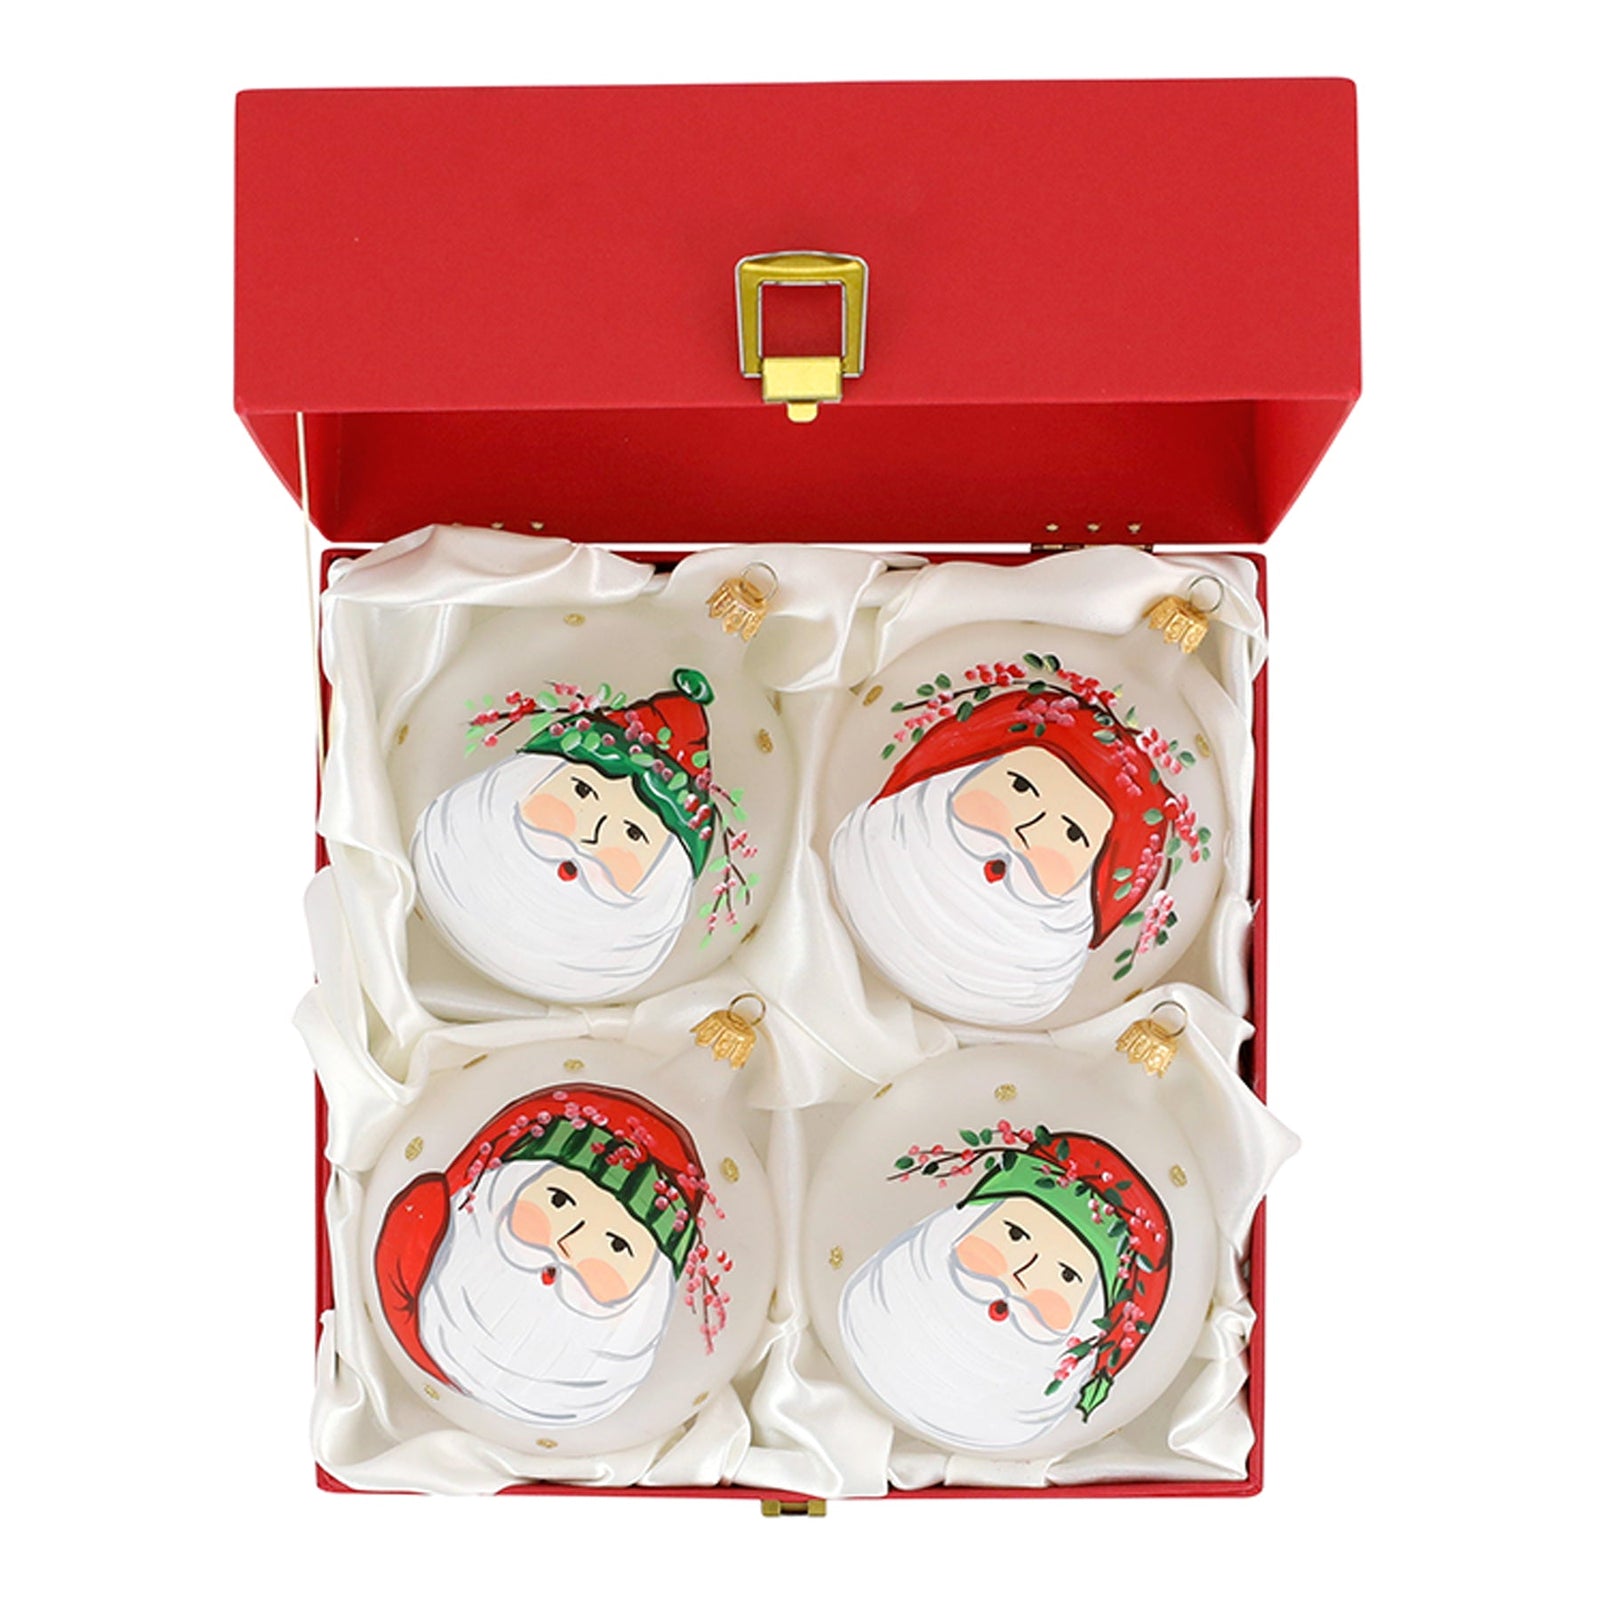 VIETRI: OLD ST. NICK ASSORTED ORNAMENTS - SET OF 4